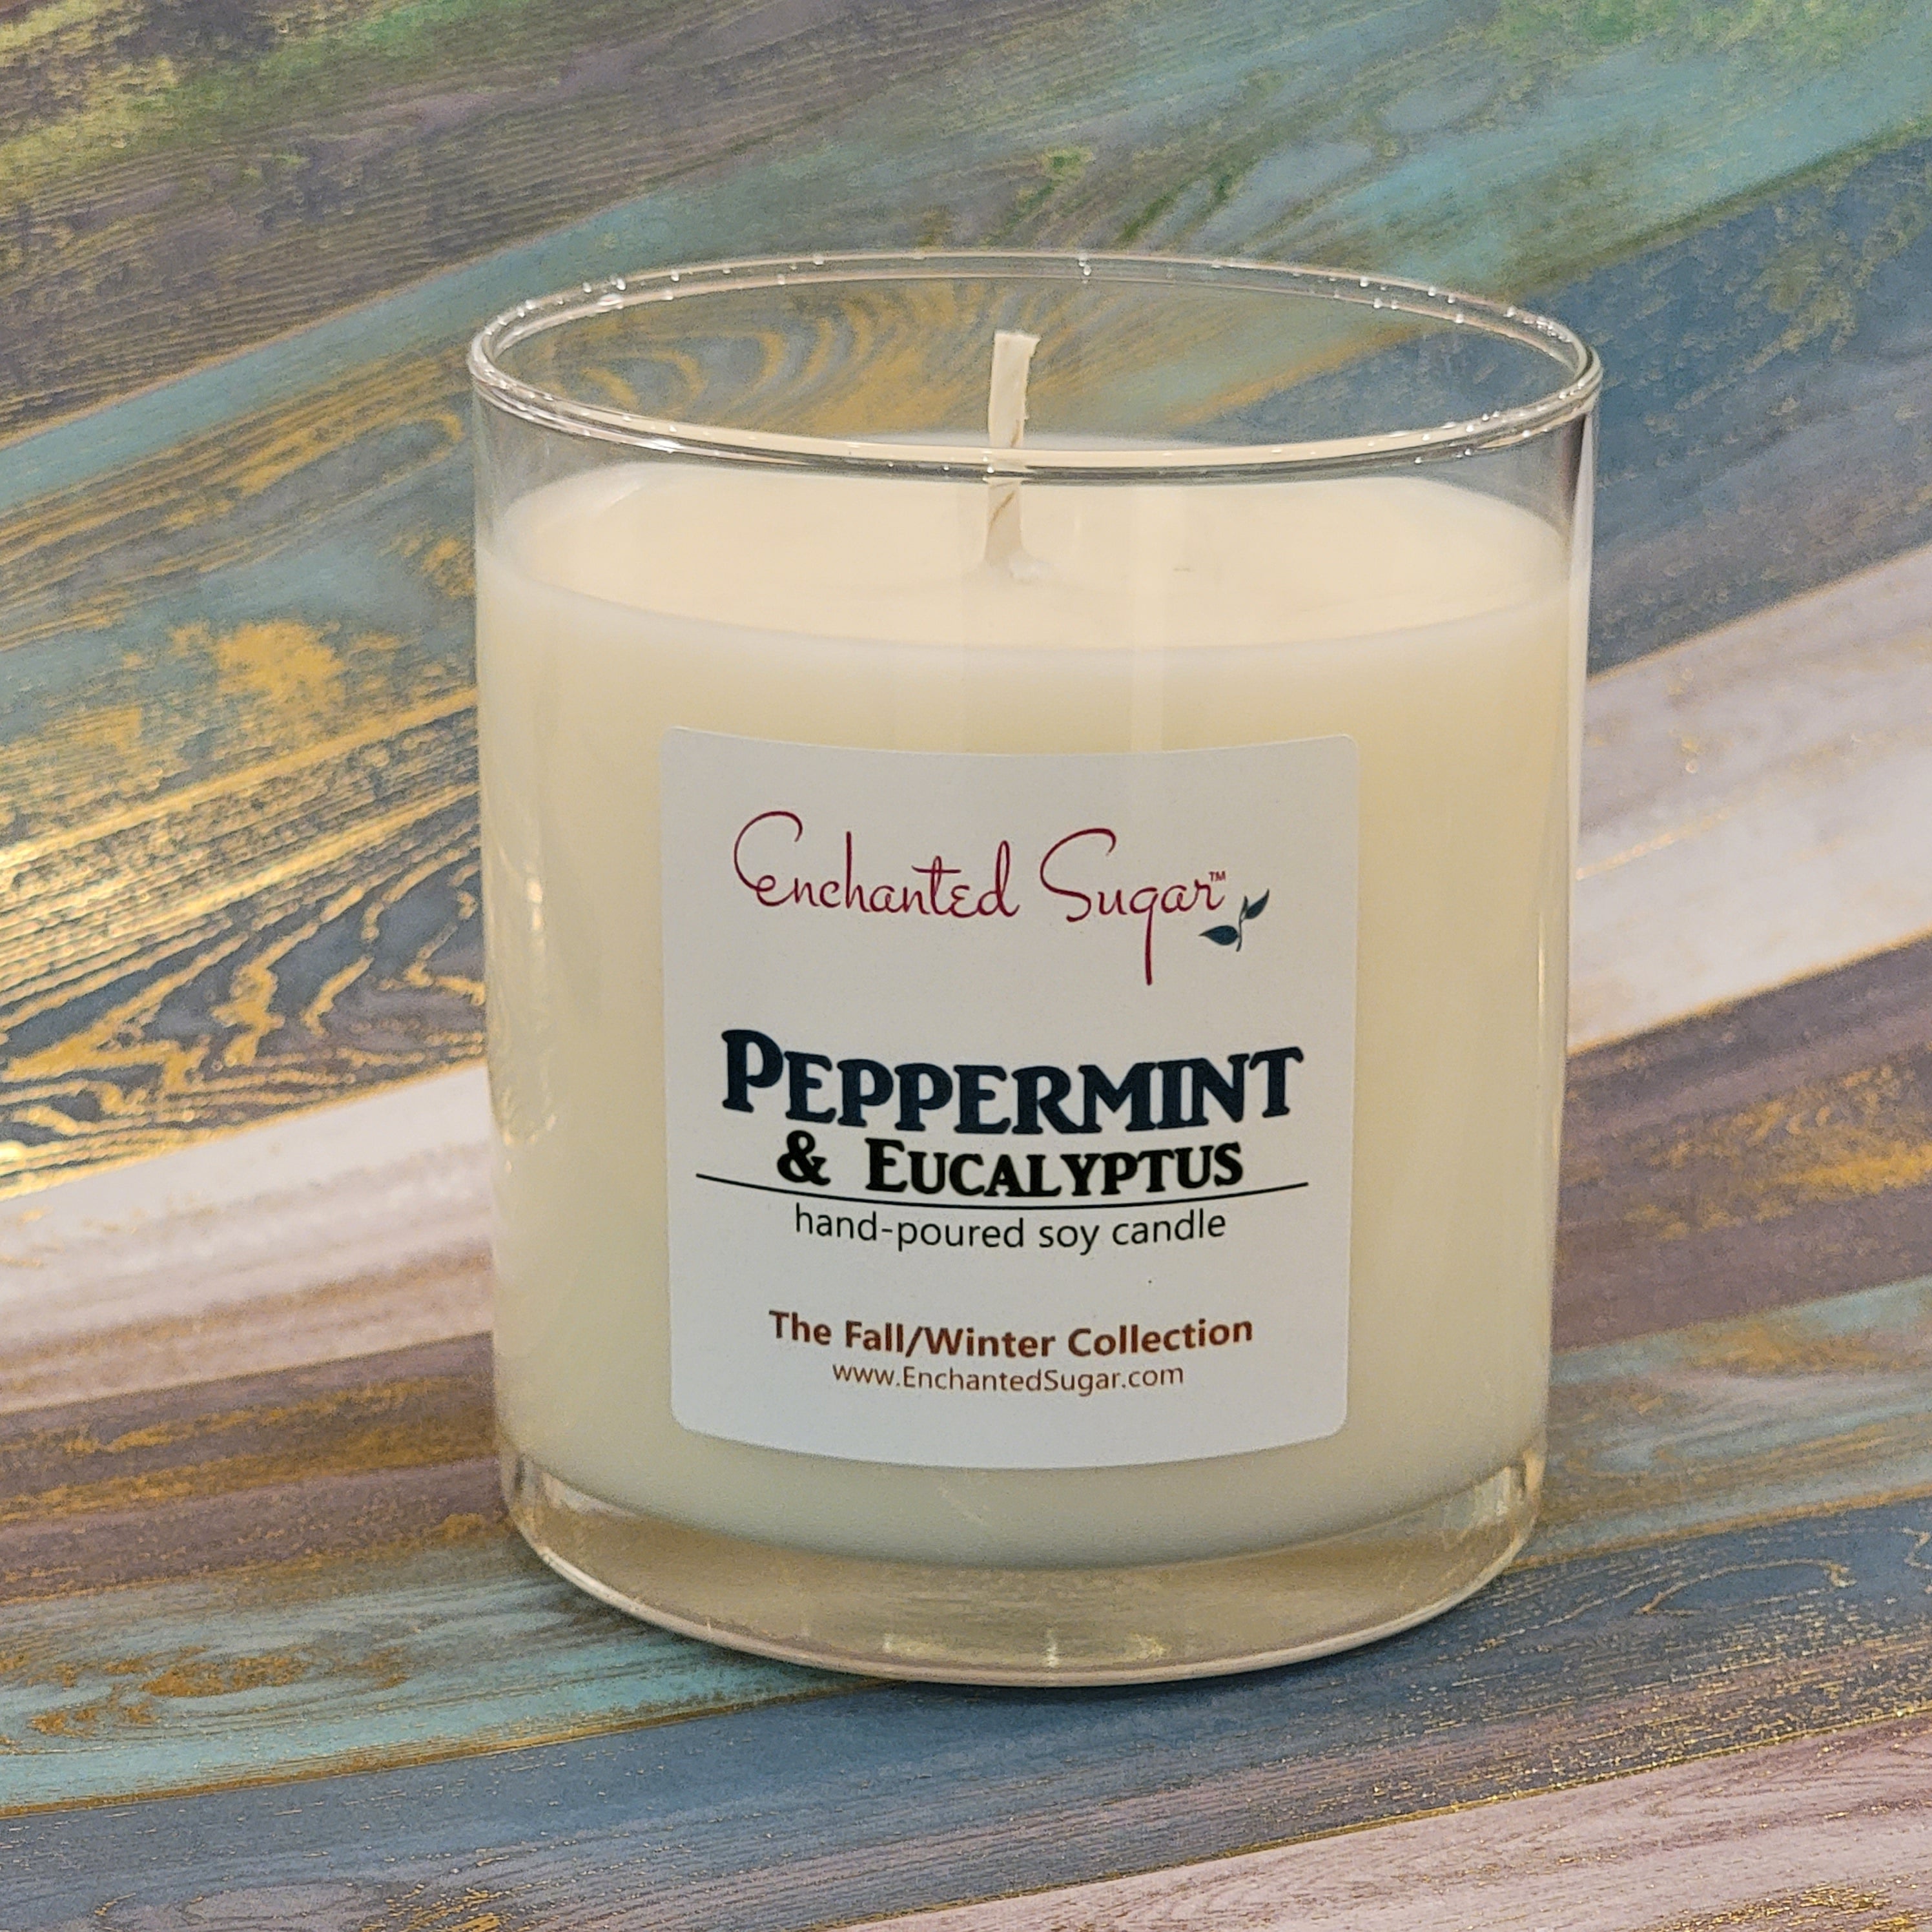 Peppermint and Eucalyptus Candles and Wax Melts